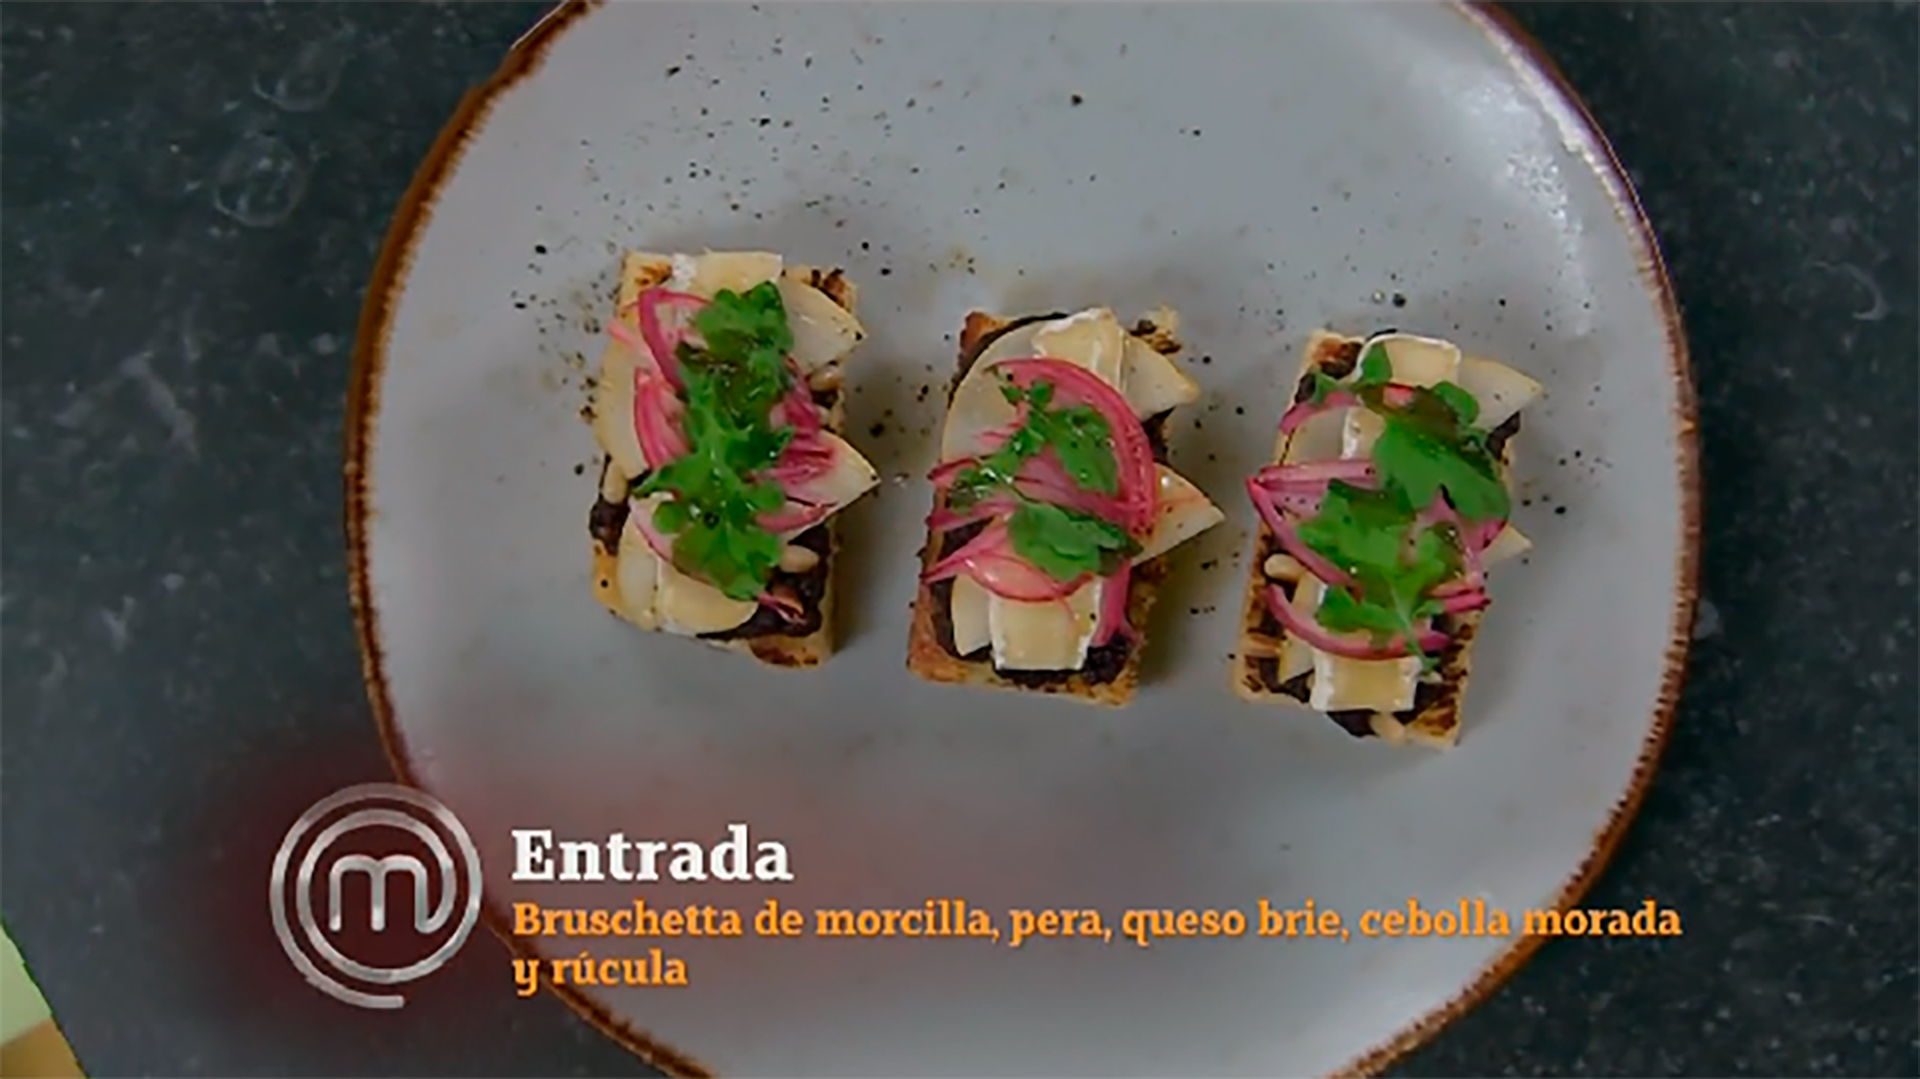 The entry presented by Tomás Fonzi in the Masterchef Celebrity 3 grand finale